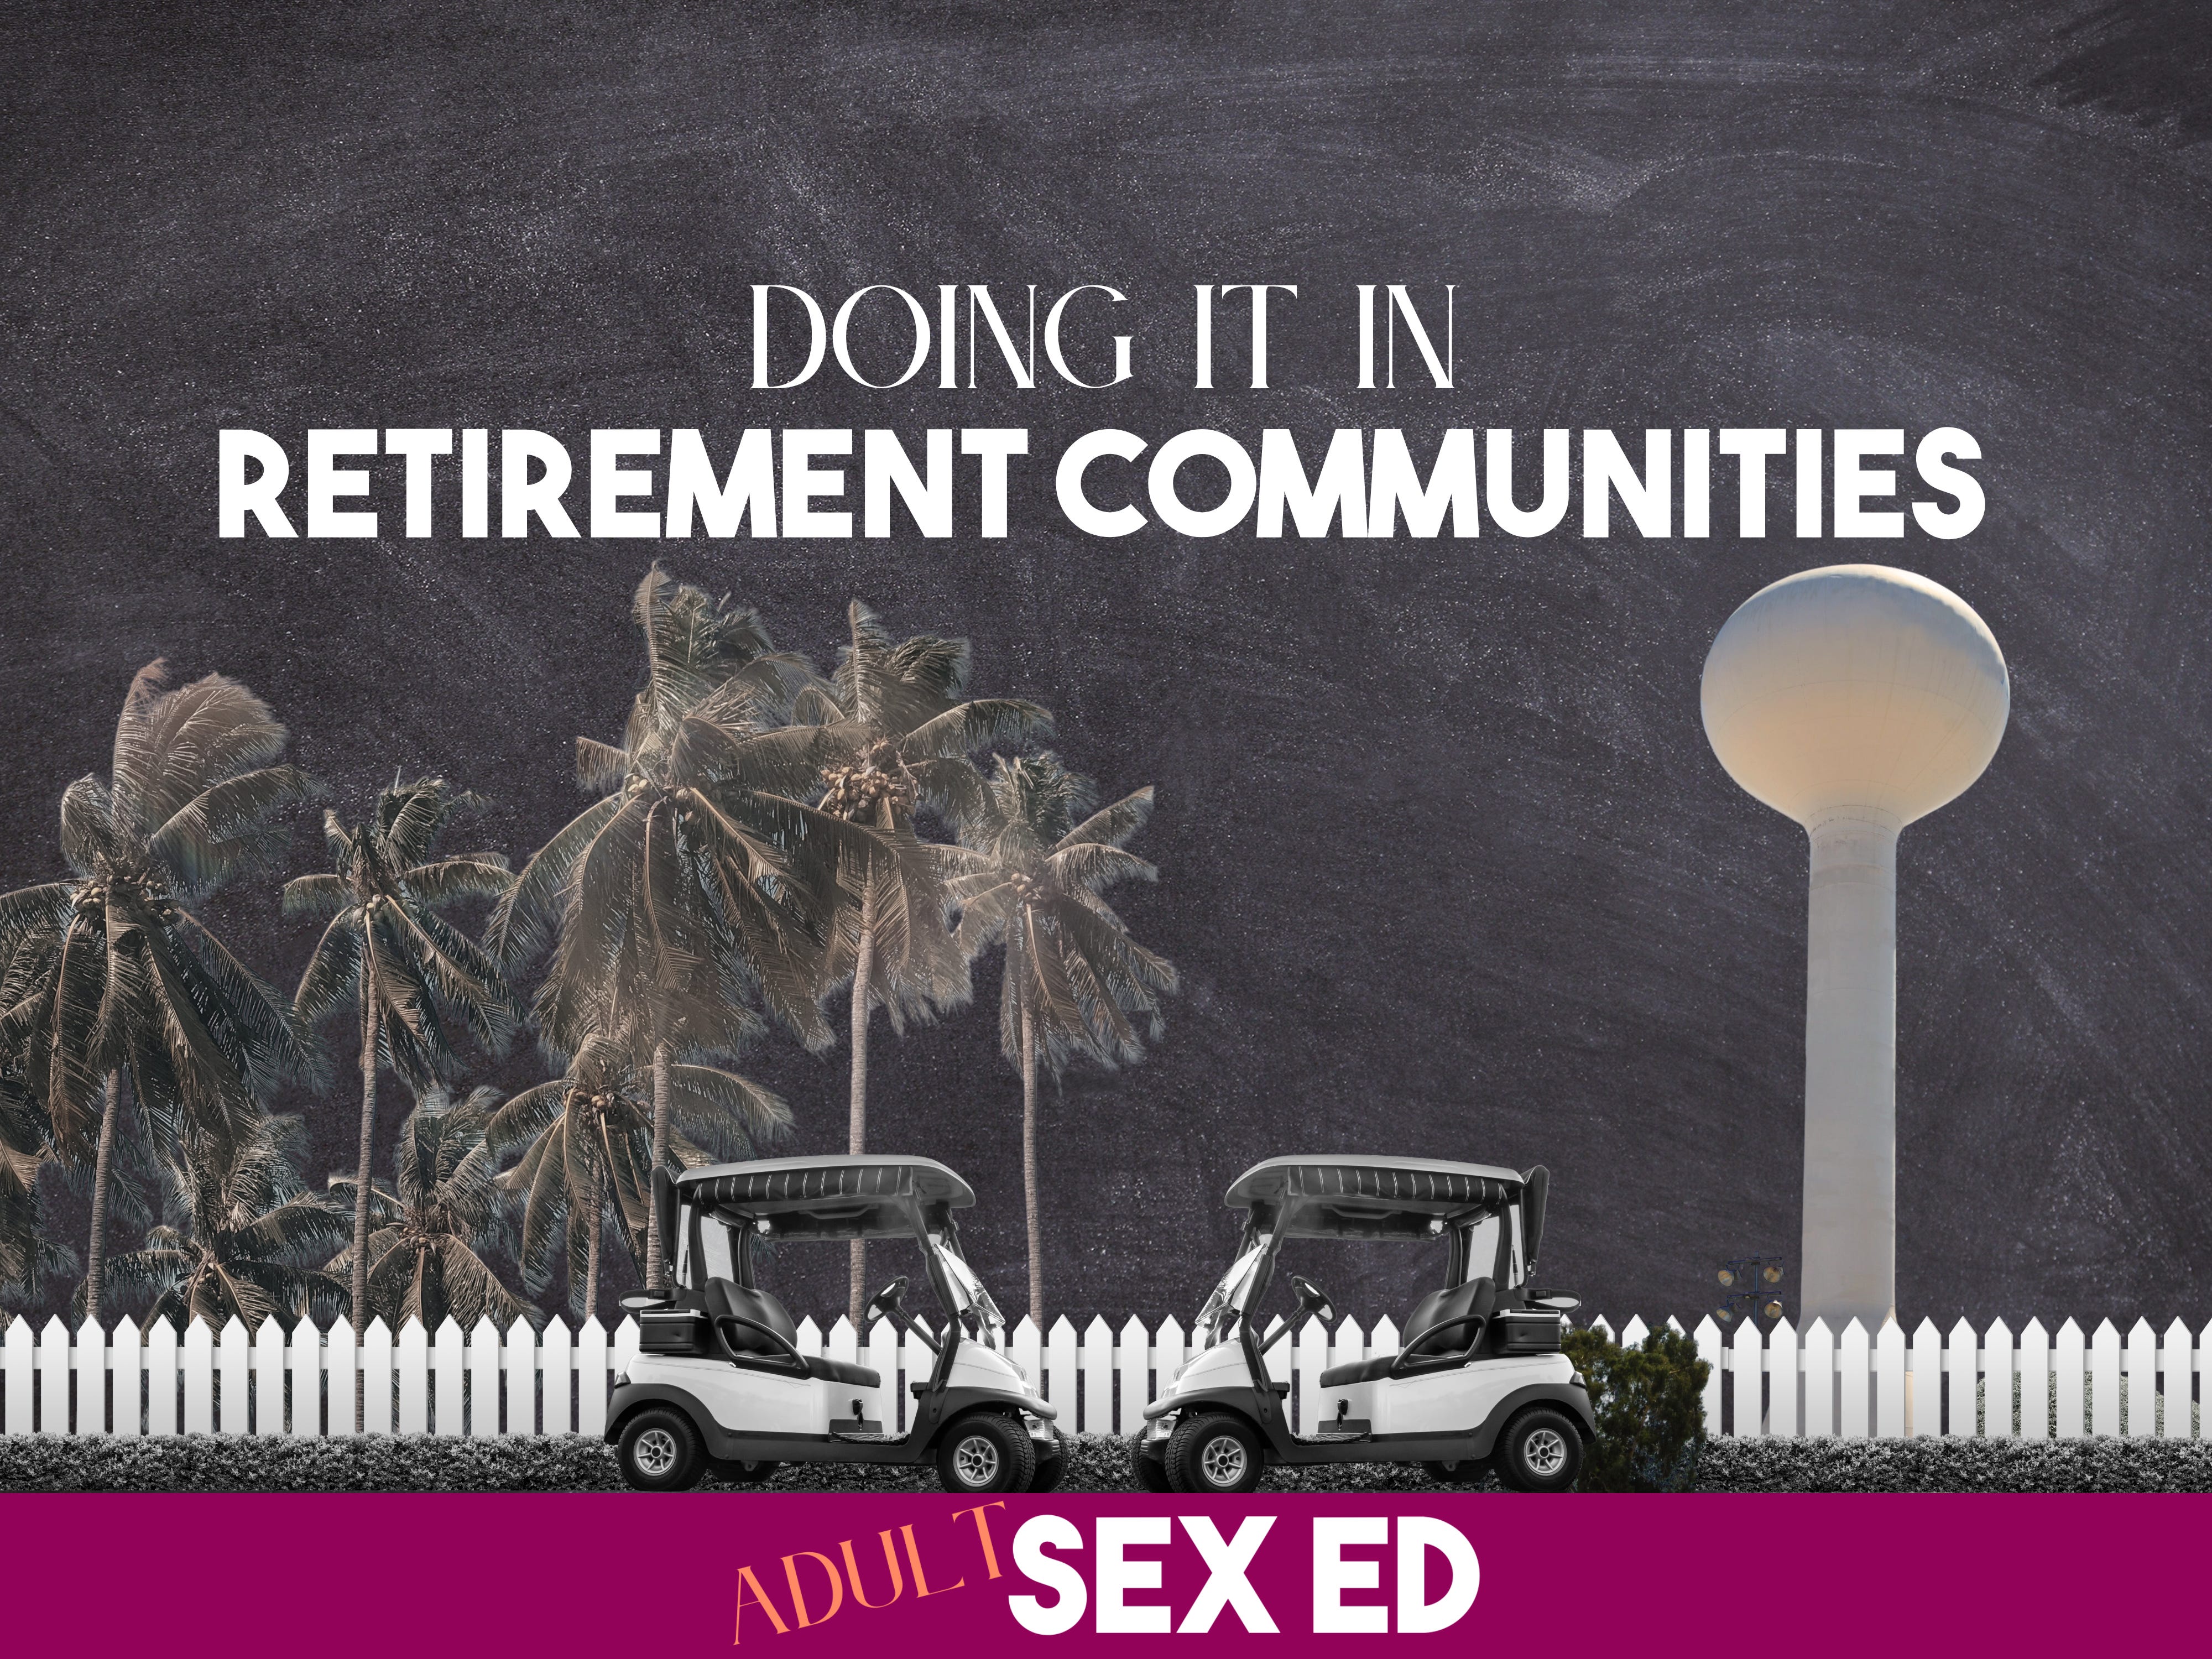 Are People Really Doing it in Retirement Communities?